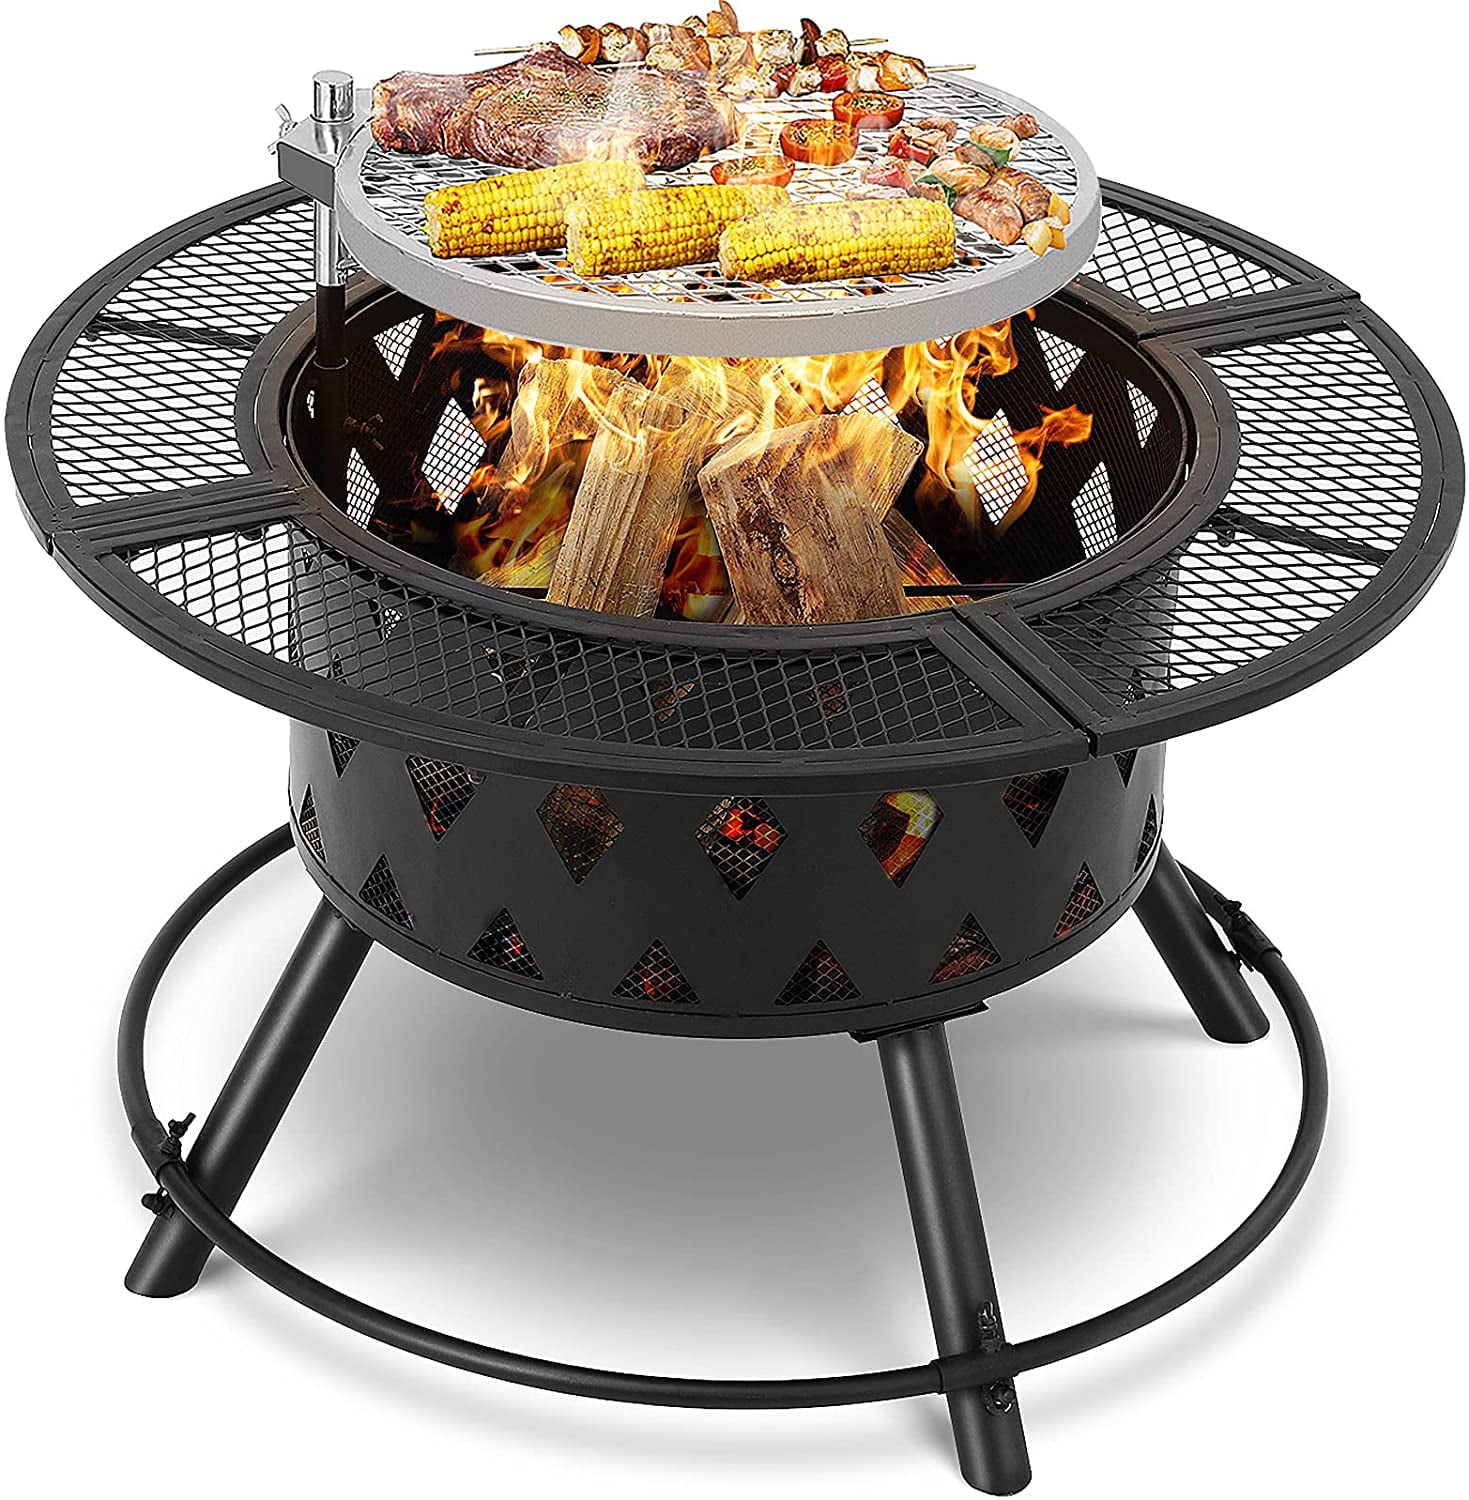 Outdoor Wood Burning Fire Pit, Fire Pit Cooking Grate Cast Iron